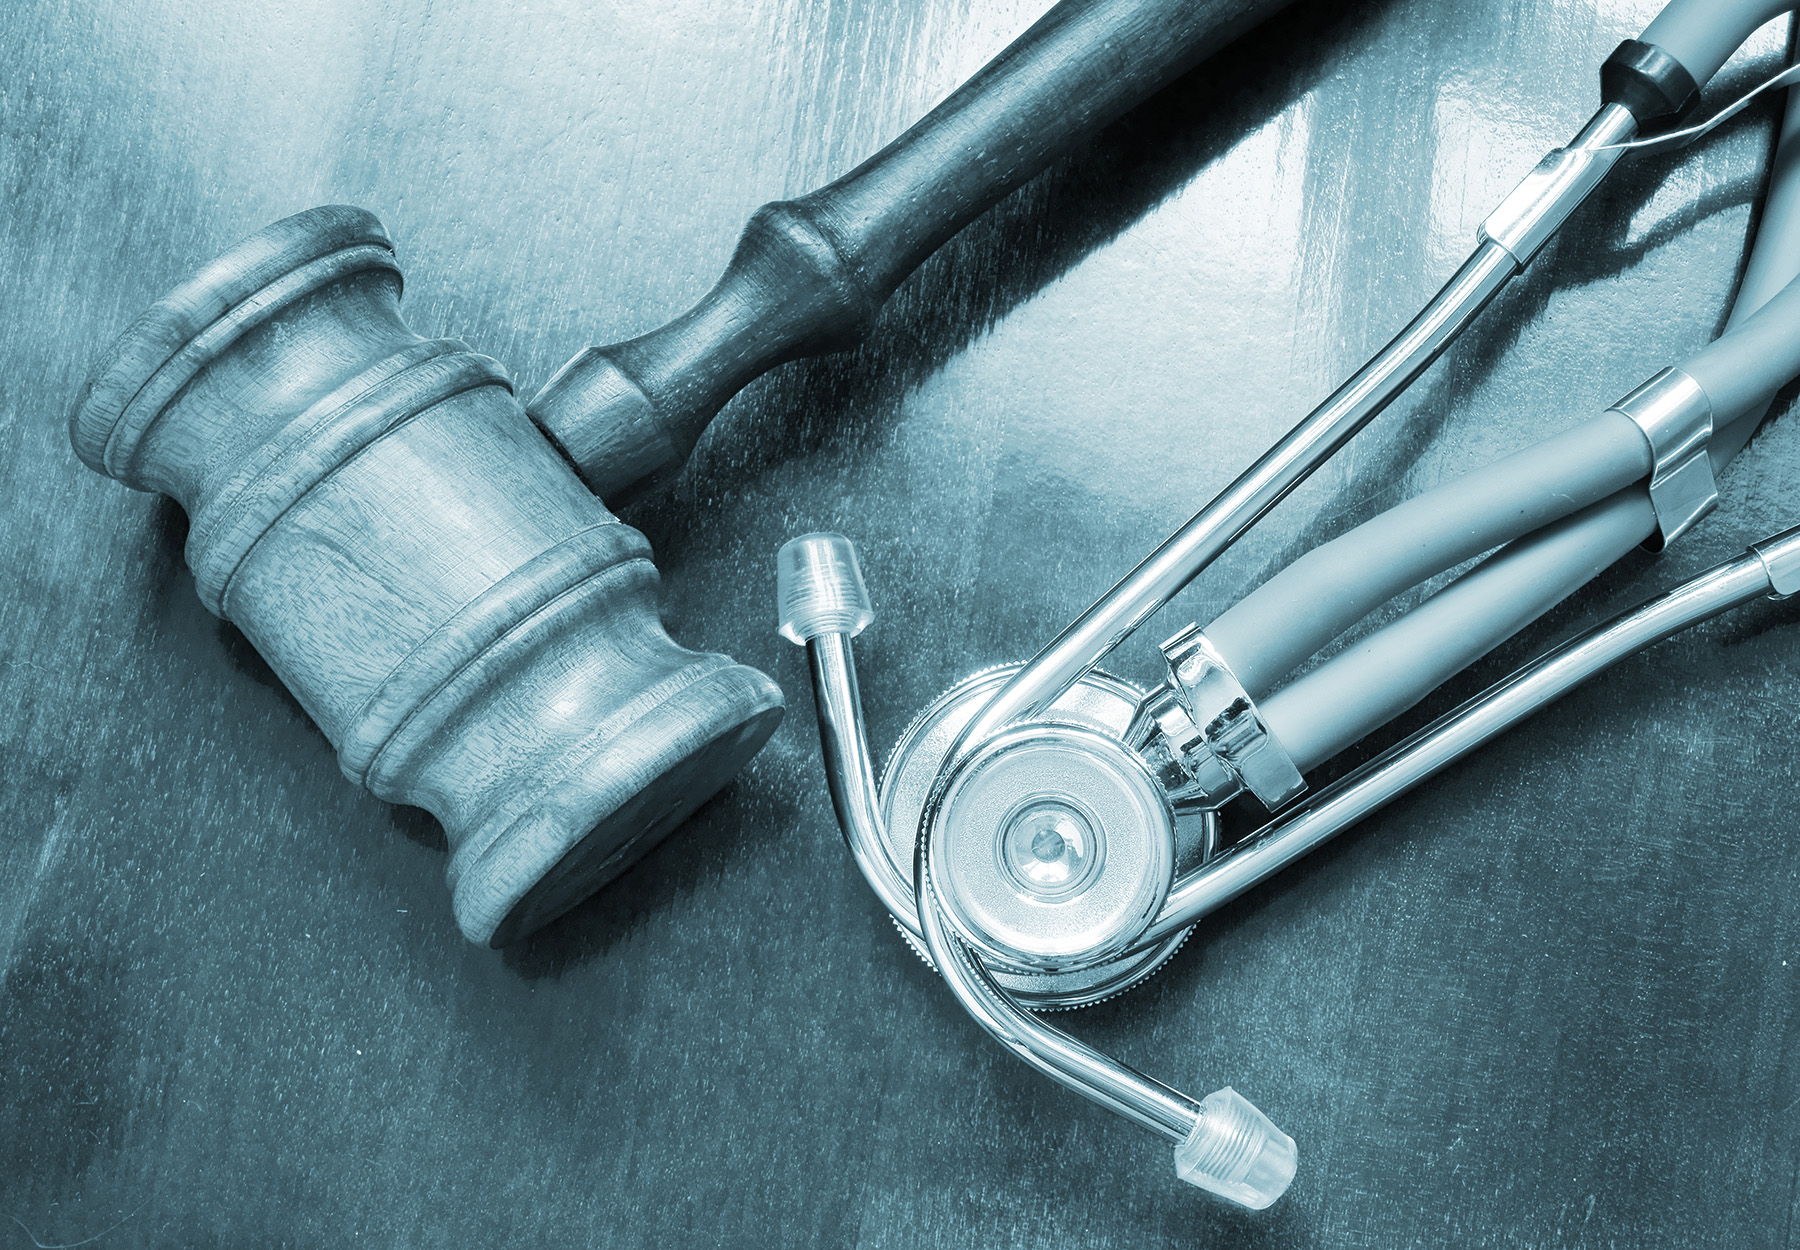 Wooden judge's gavel and stethoscope on wooden table stock image to represent actions against healthcare fraud